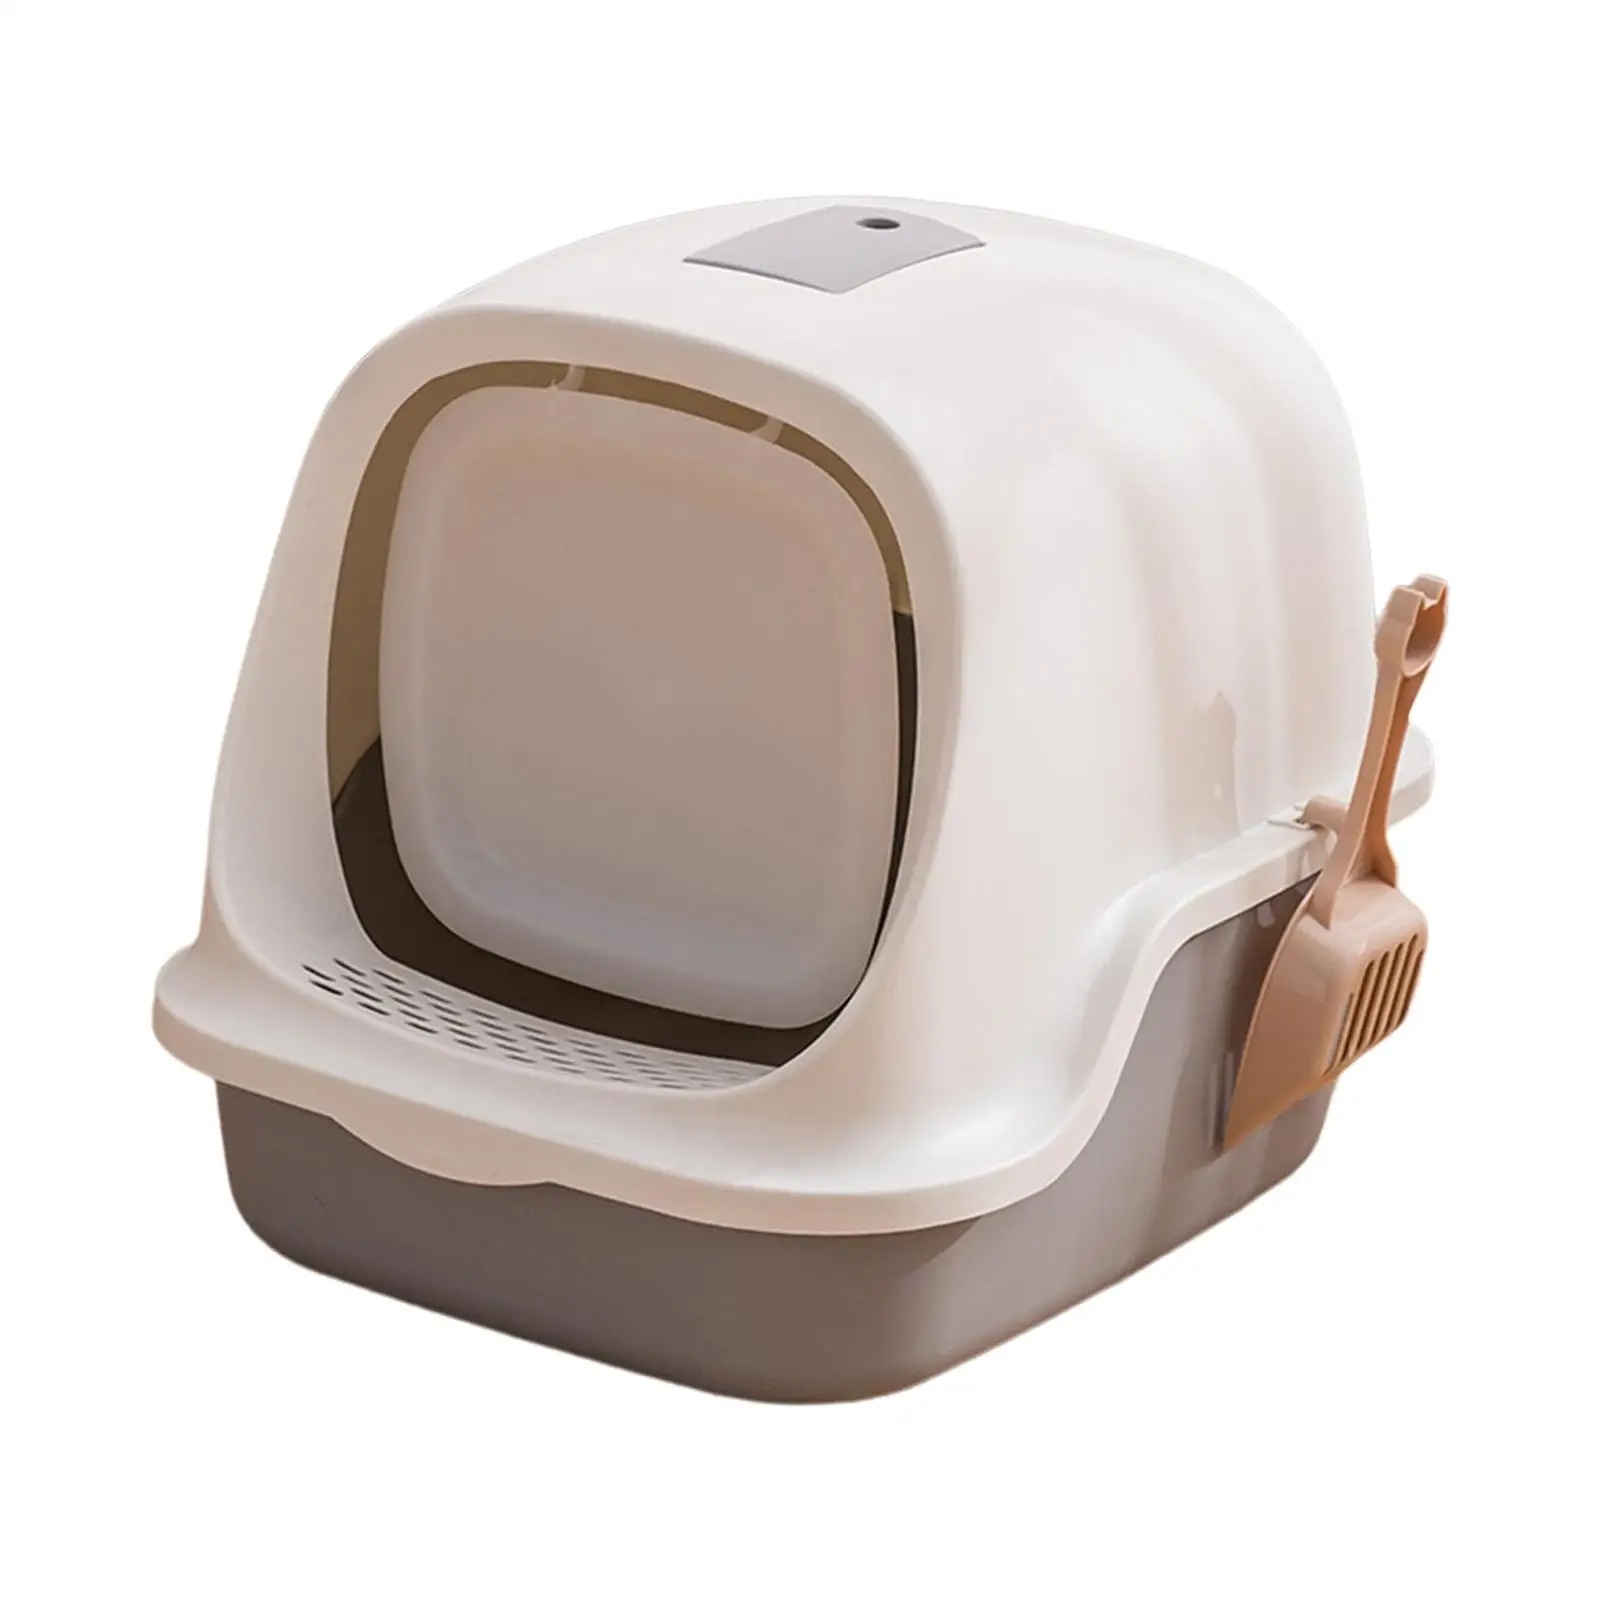 Enclosed Cat Litter Box for Indoor Cats Large Fully Enclosed Hooded Cat Toilet for Growing Cats for Small and Medium Cats